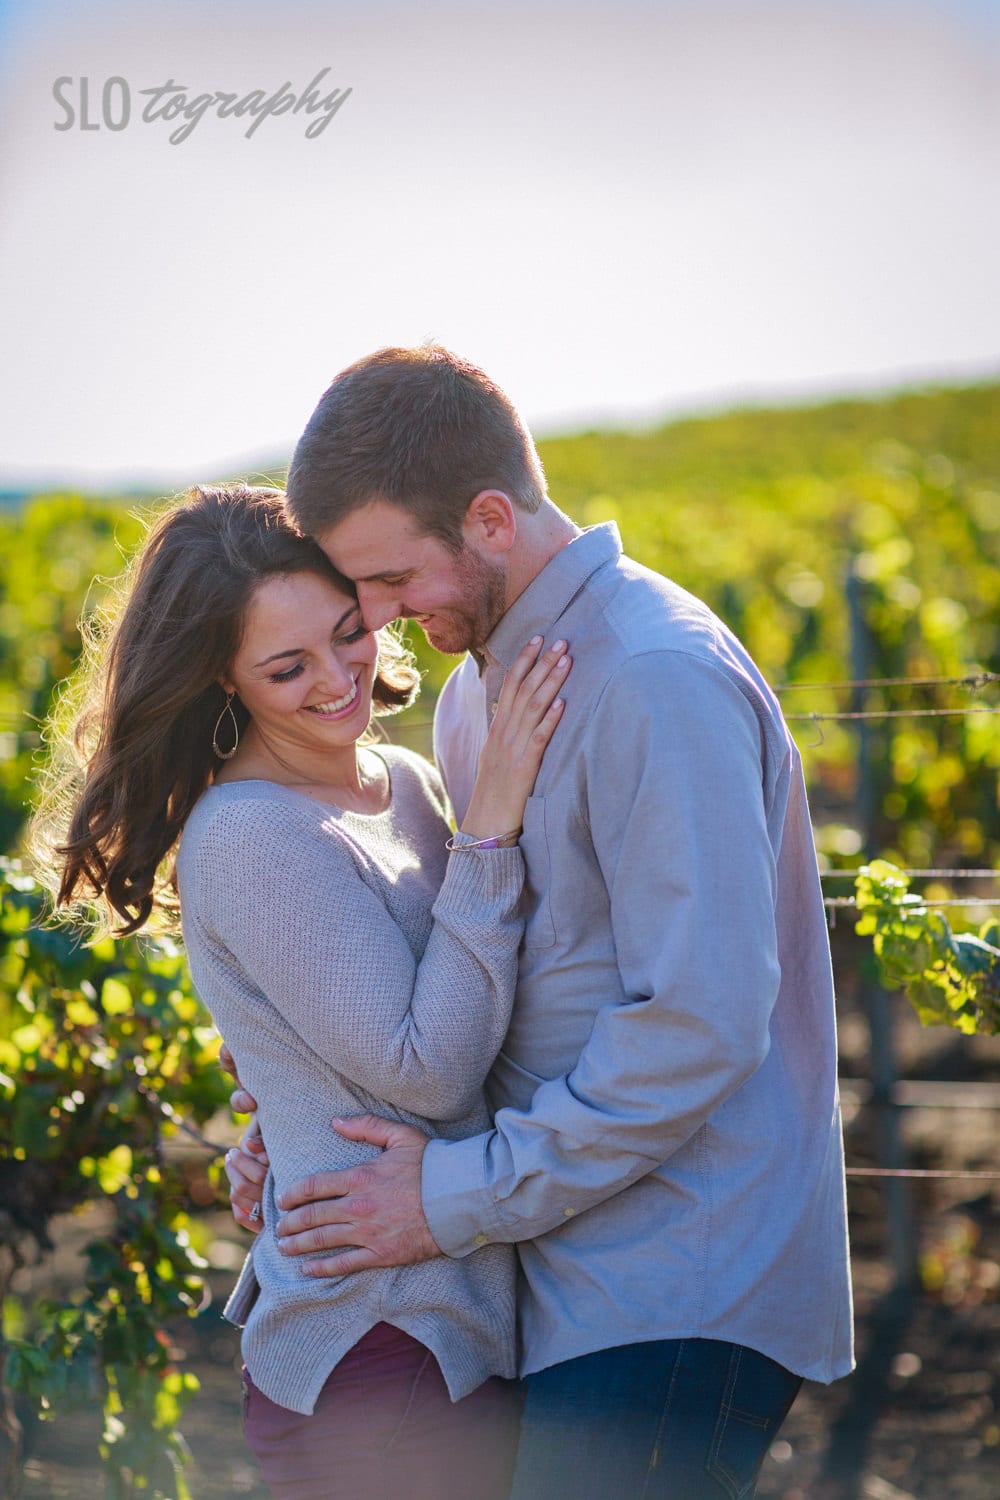 Laughter in the Vineyard